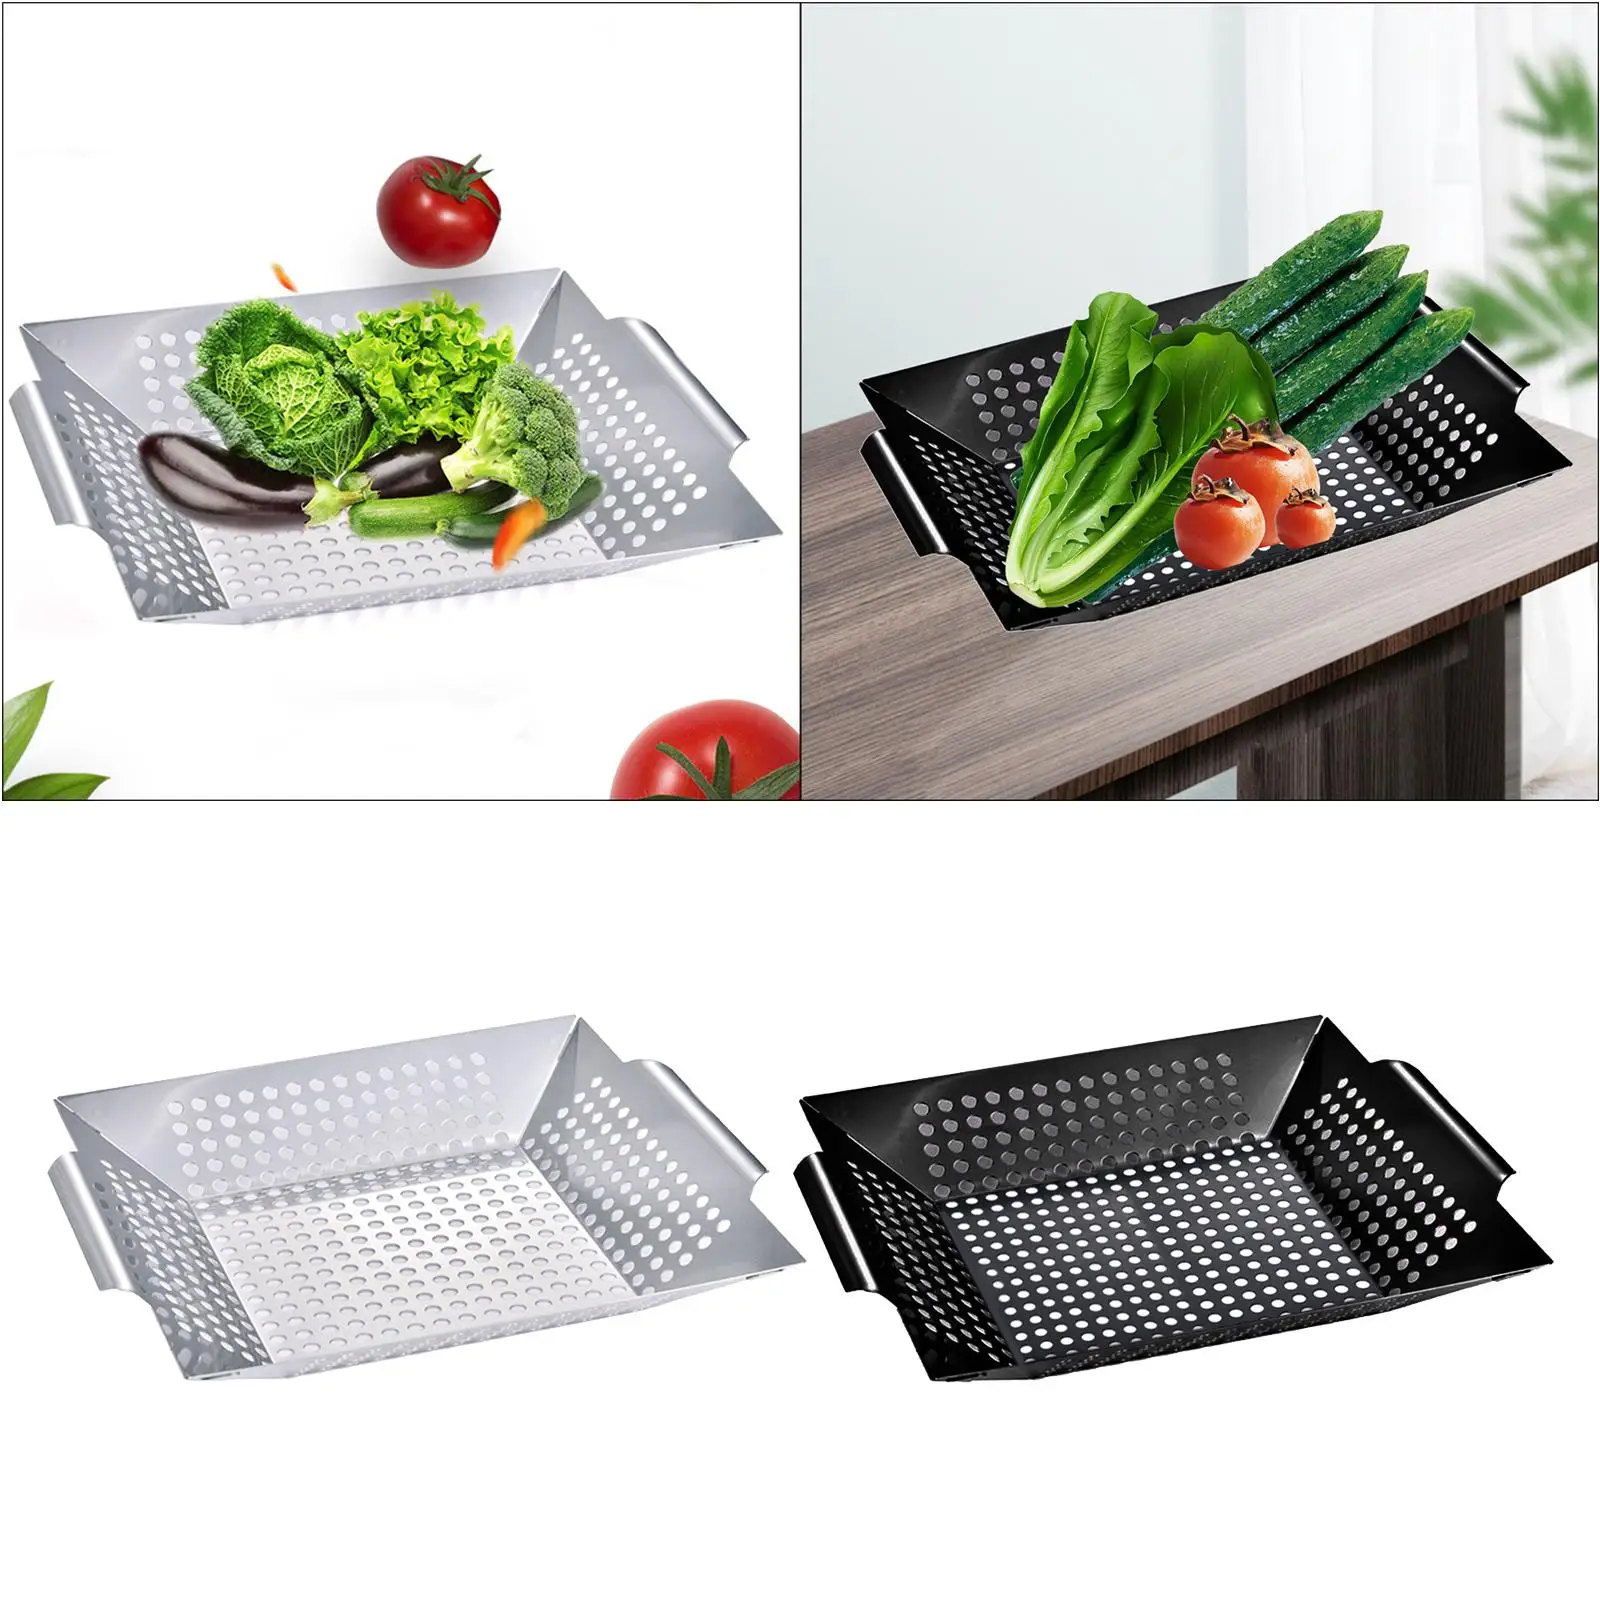 Grill Pan Stainless Steel Barbecue Grill Plate Food Vegetable Basket Tray BBQ Tool Kitchen Gadgets Outdoor Tool Grill Pan